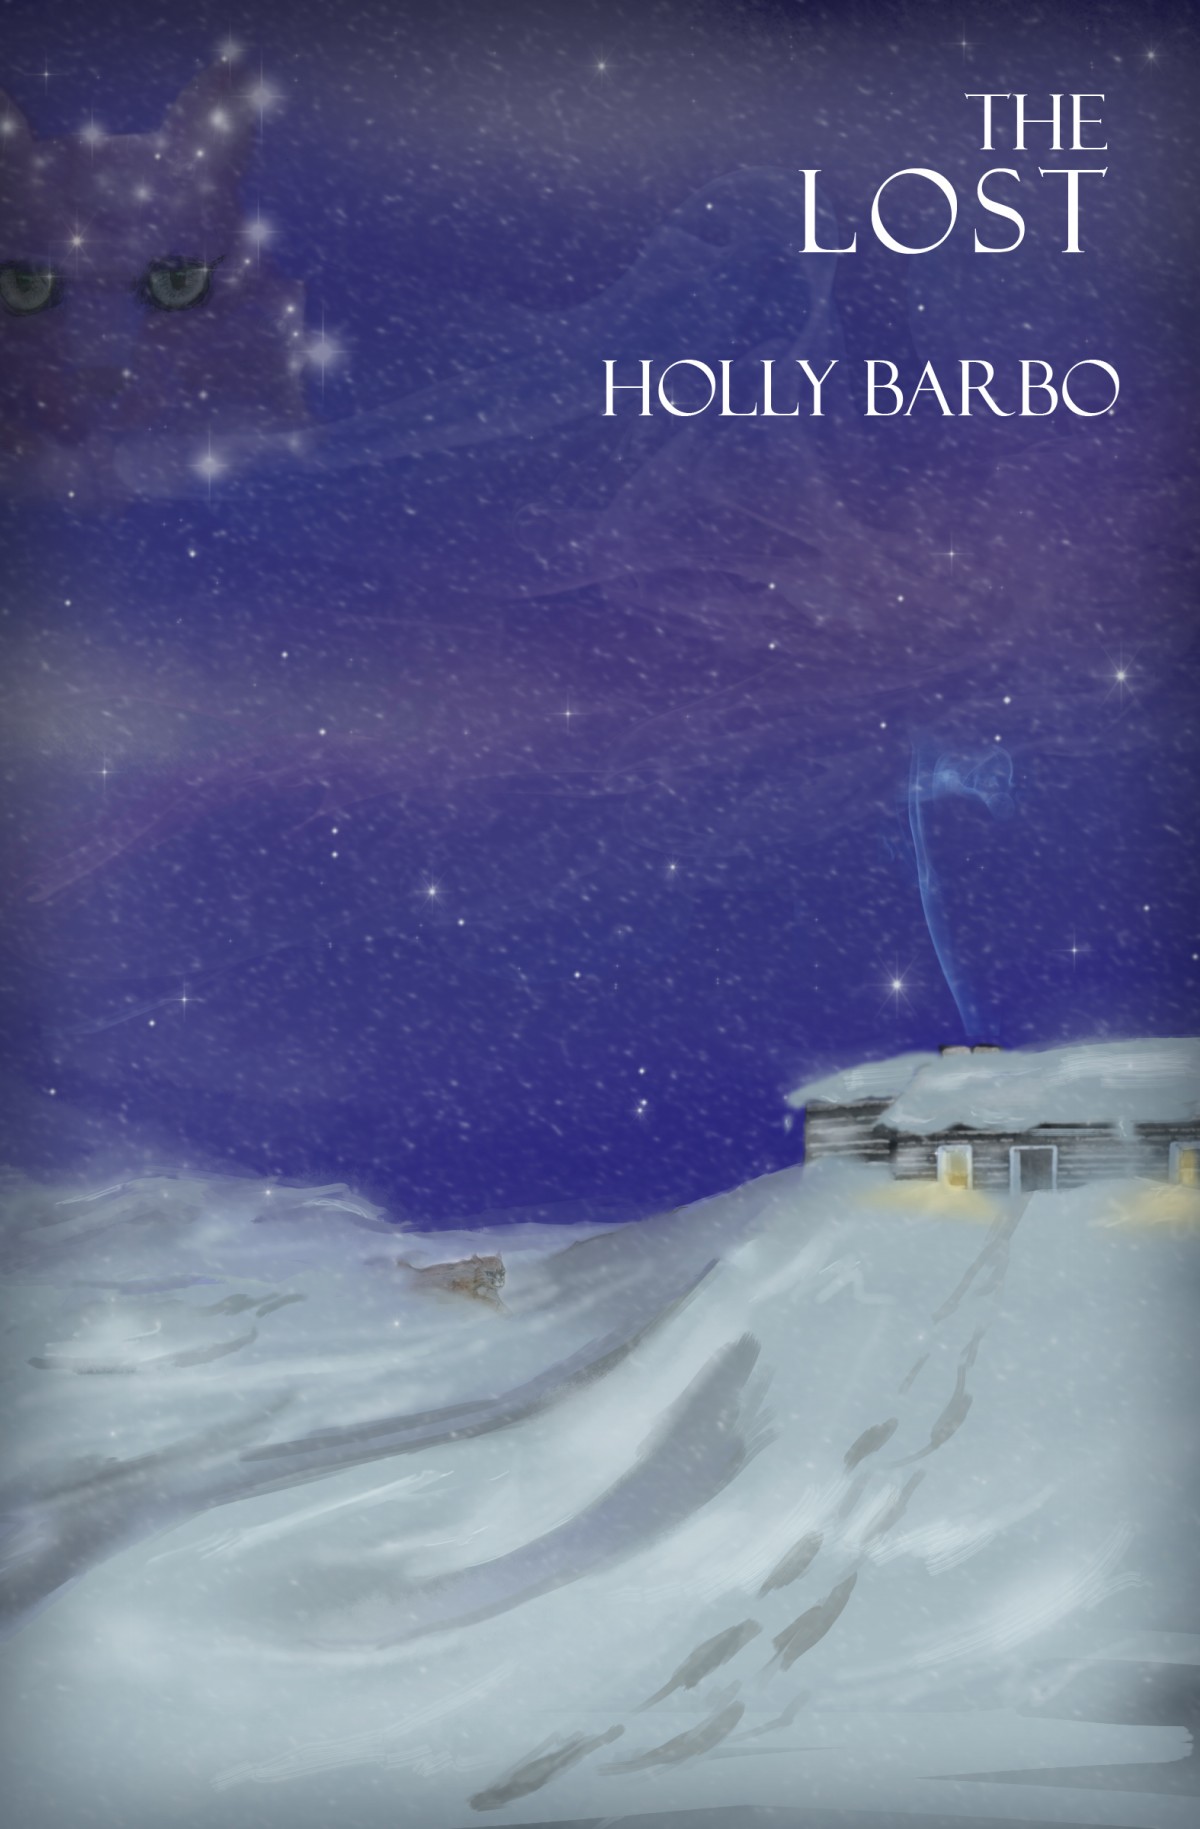 The Lost by Holly Barbo